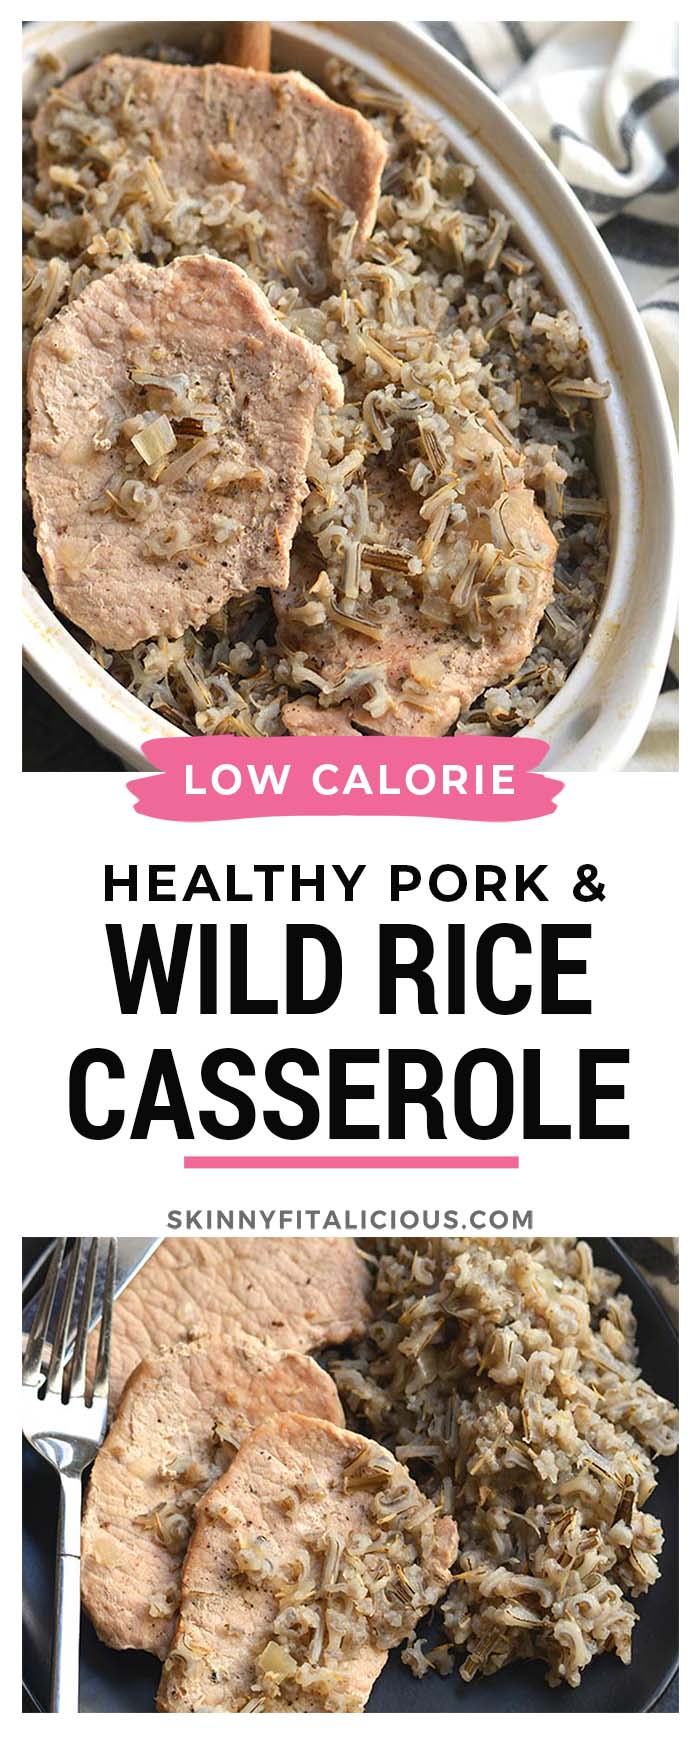 Pork Chops Wild Rice Casserole recipe that's quick to make with a few simple ingredients! A healthy meal that's naturally gluten free, light and packed with flavor.